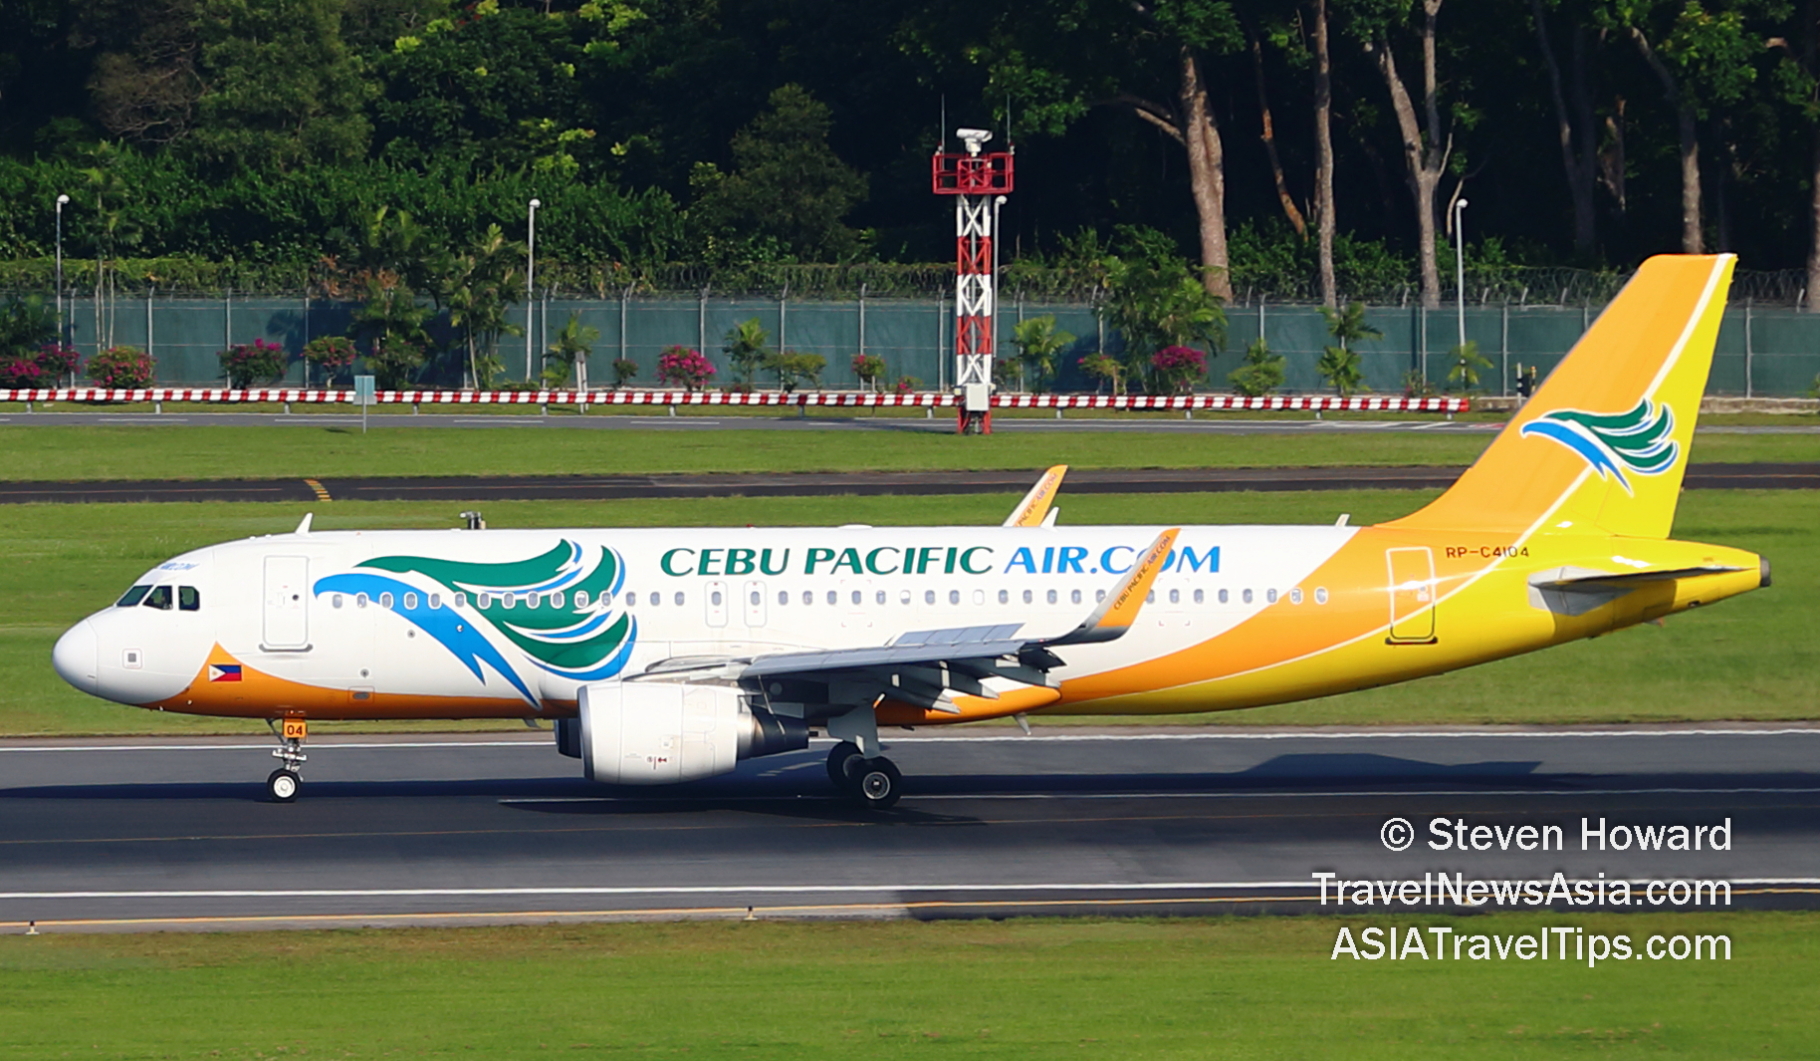 Cebu Pacific A320 reg: RP-C4104. Picture by Steven Howard of TravelNewsAsia.com Click to enlarge.